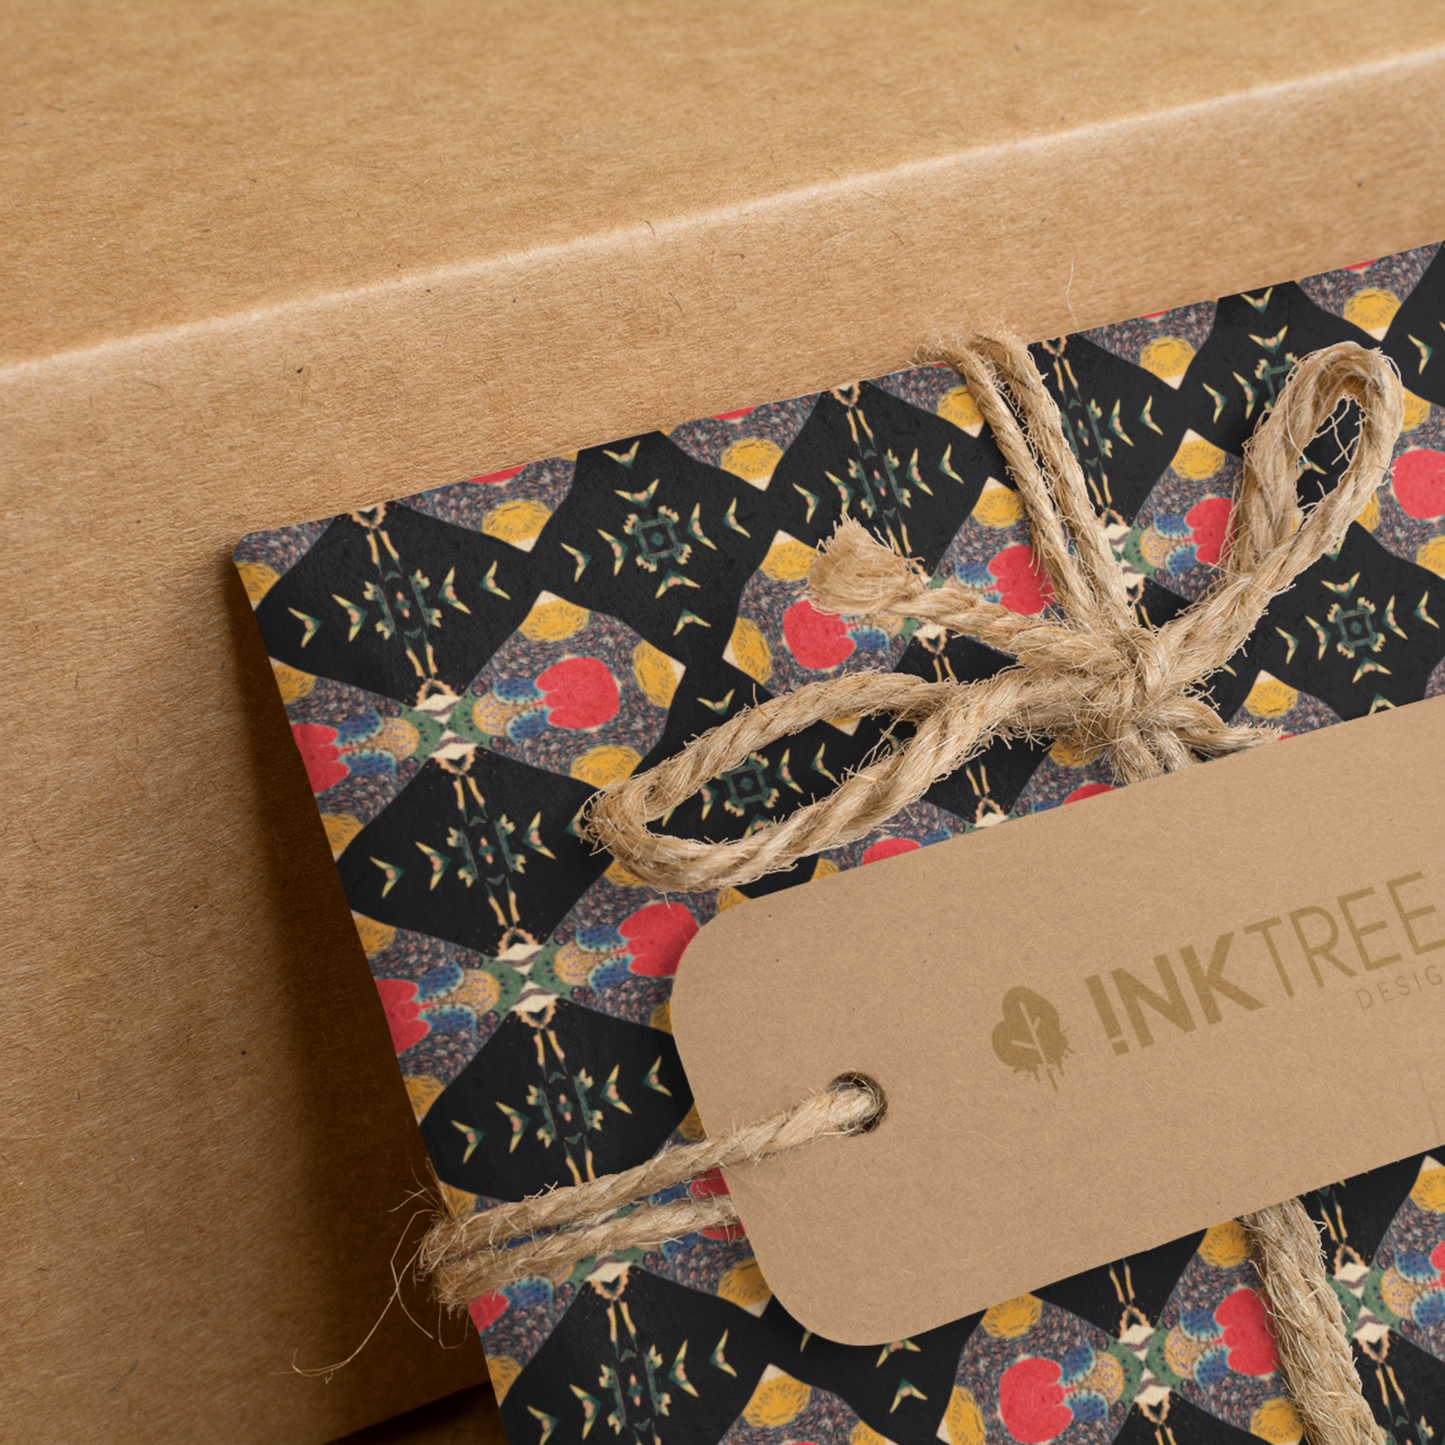 A present wrapped with a gold, black, blue, green red and white oriental looking pattern, tied with brown string with a brown paper tag with ink tree design logo on it, leaning on a brown paper background.